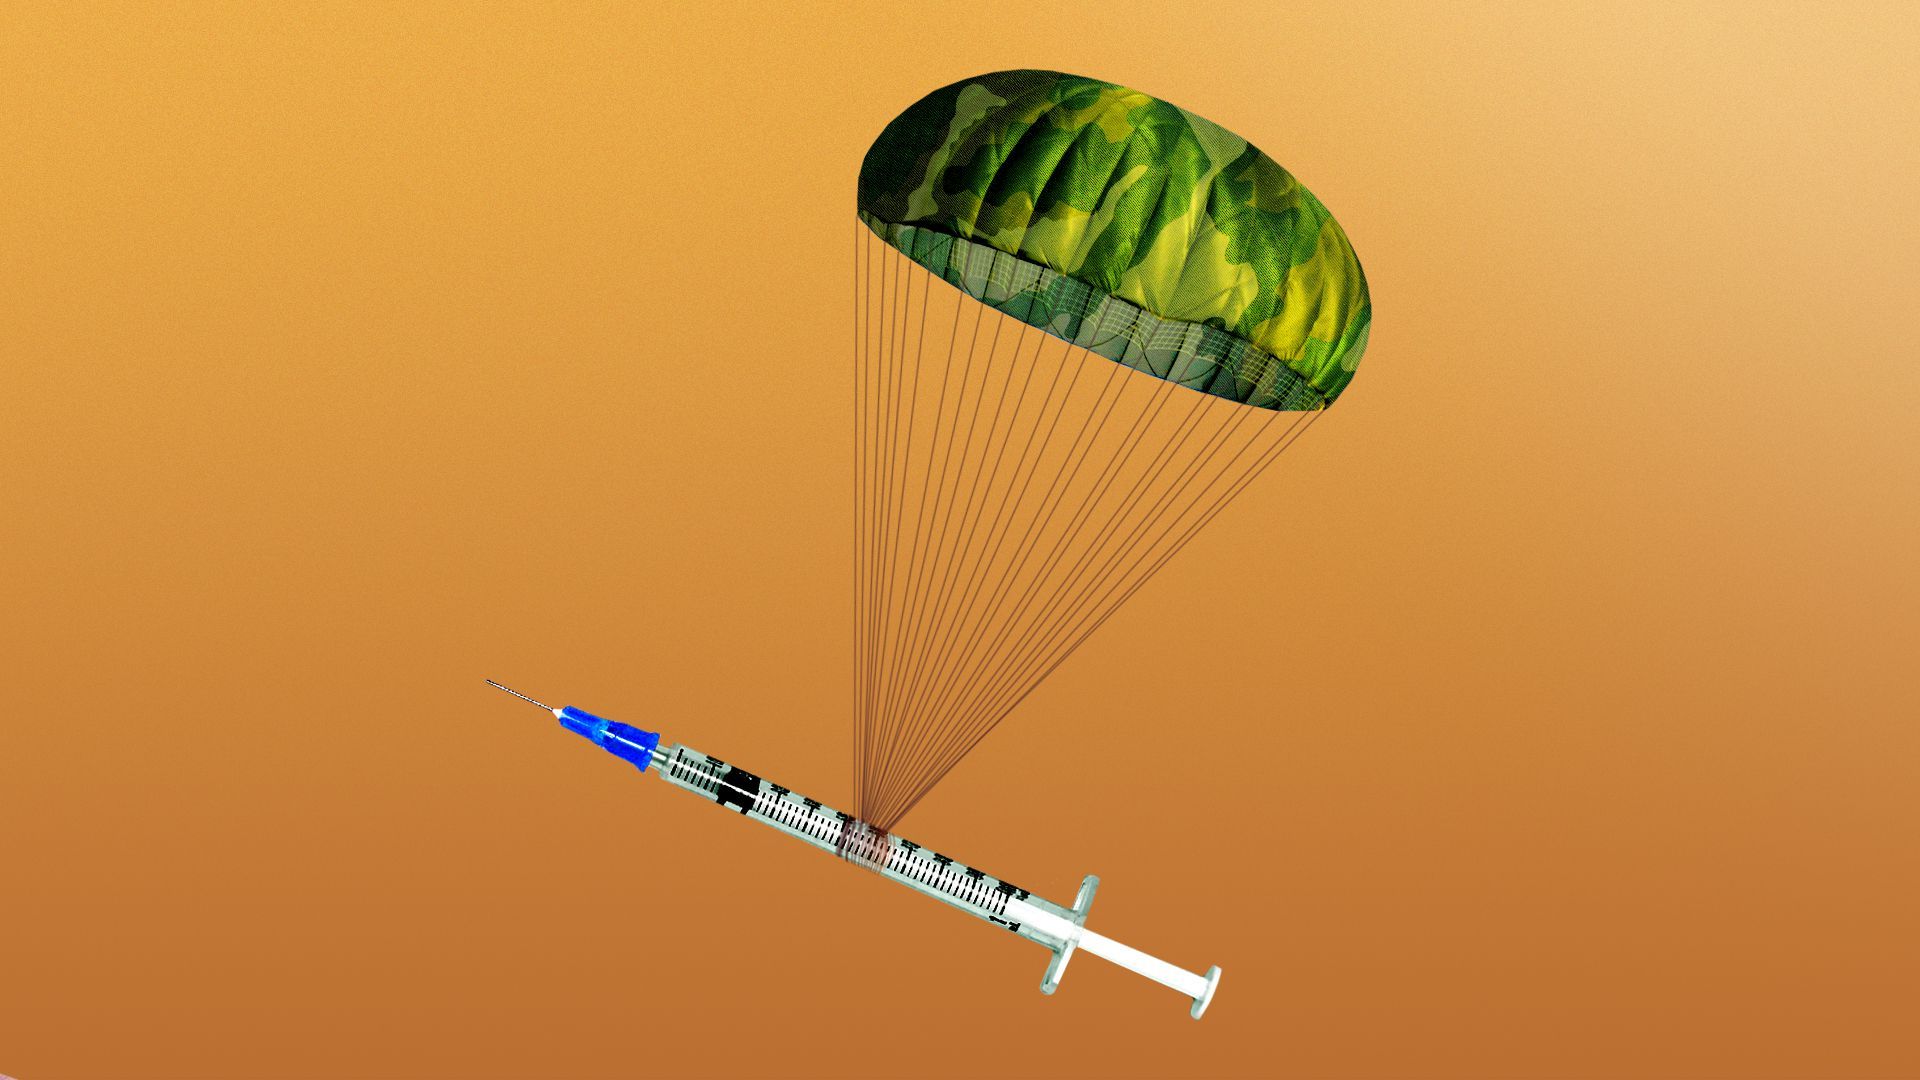 Illustration of a syringe attached to an army camouflage parachute 